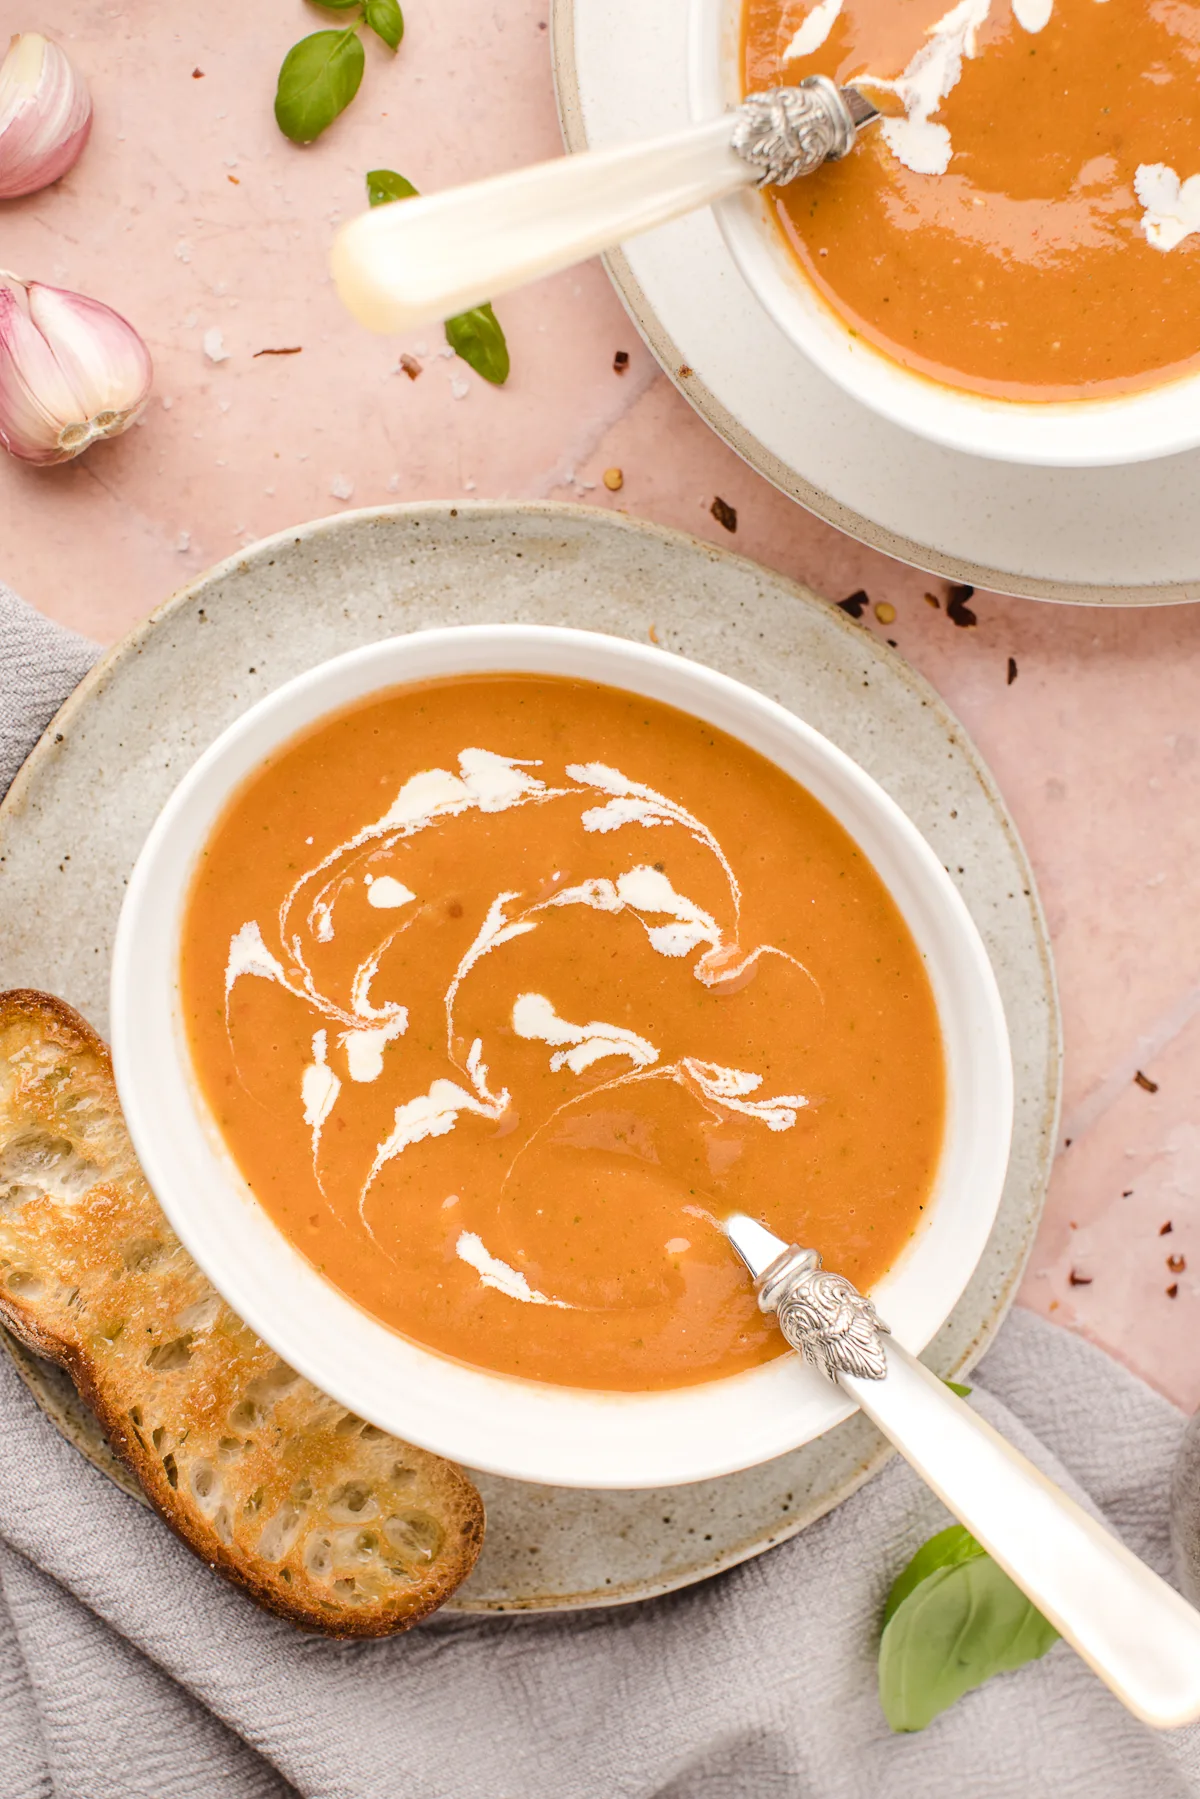 This easy roasted tomato soup recipe is healthy, hearty, and delicious - plus, it's affordable and simple to make! It's naturally vegan too!